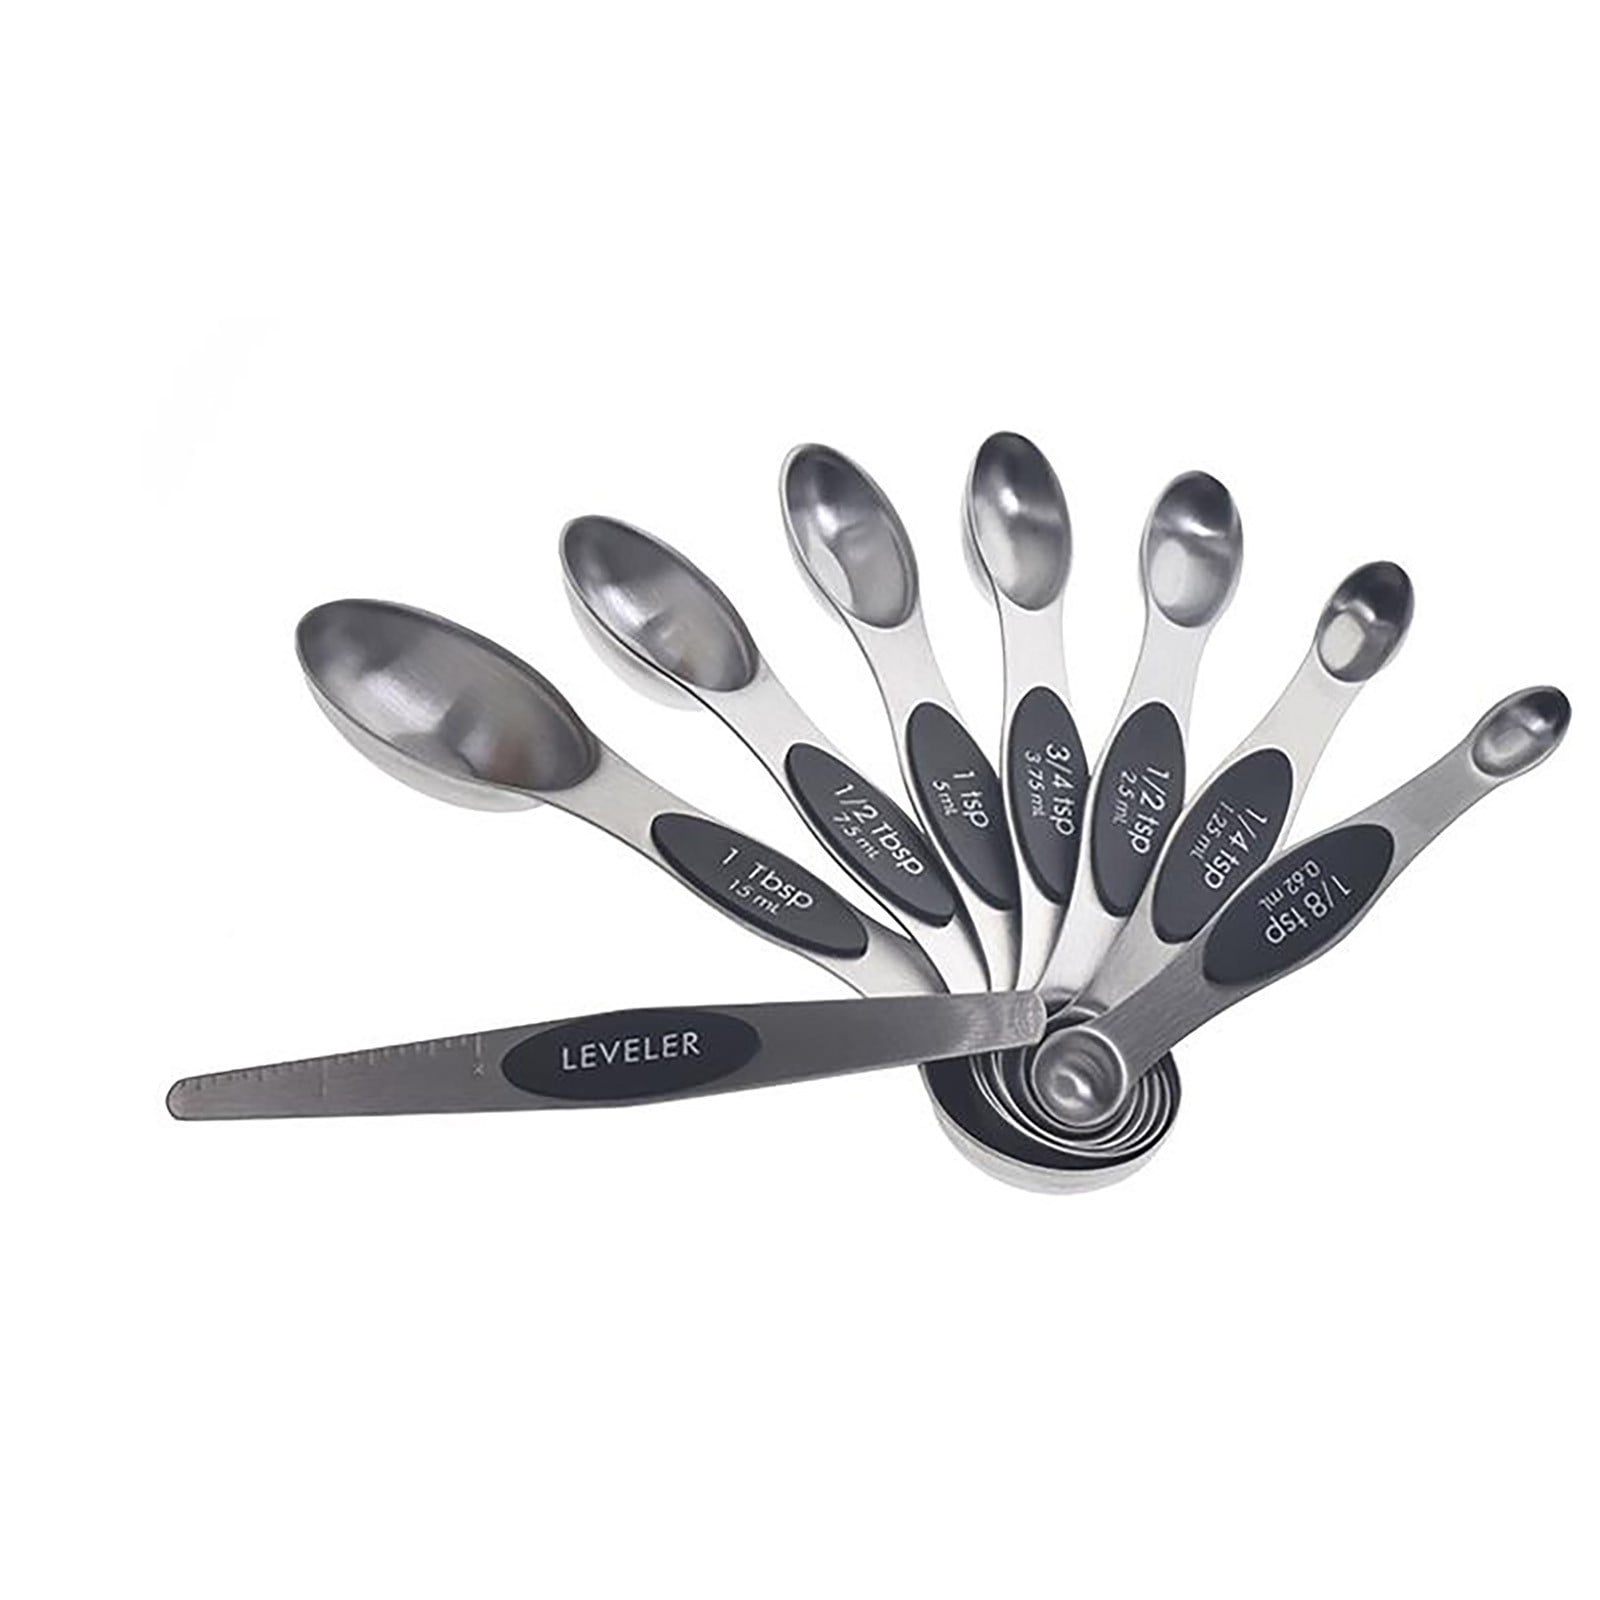 Moocorvic 8 Piece Measuring Cups and Spoons Set Tablespoon Measure Spoon with Plastic Head, Stackable Stainless Steel Handle Accurate Tablespoon for